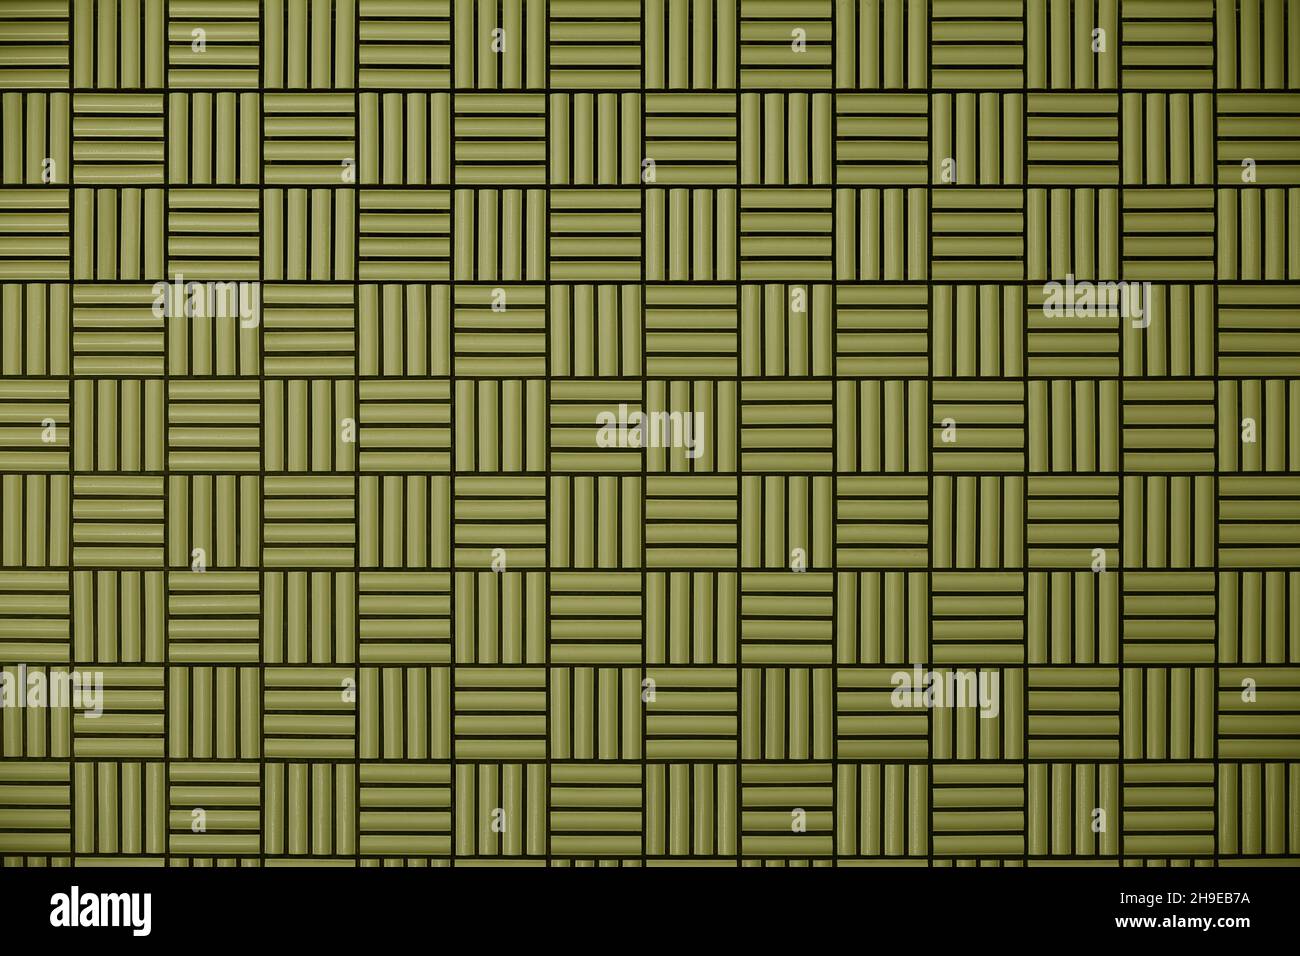 Yellow tile wall with geometric pattern as background material Stock Photo